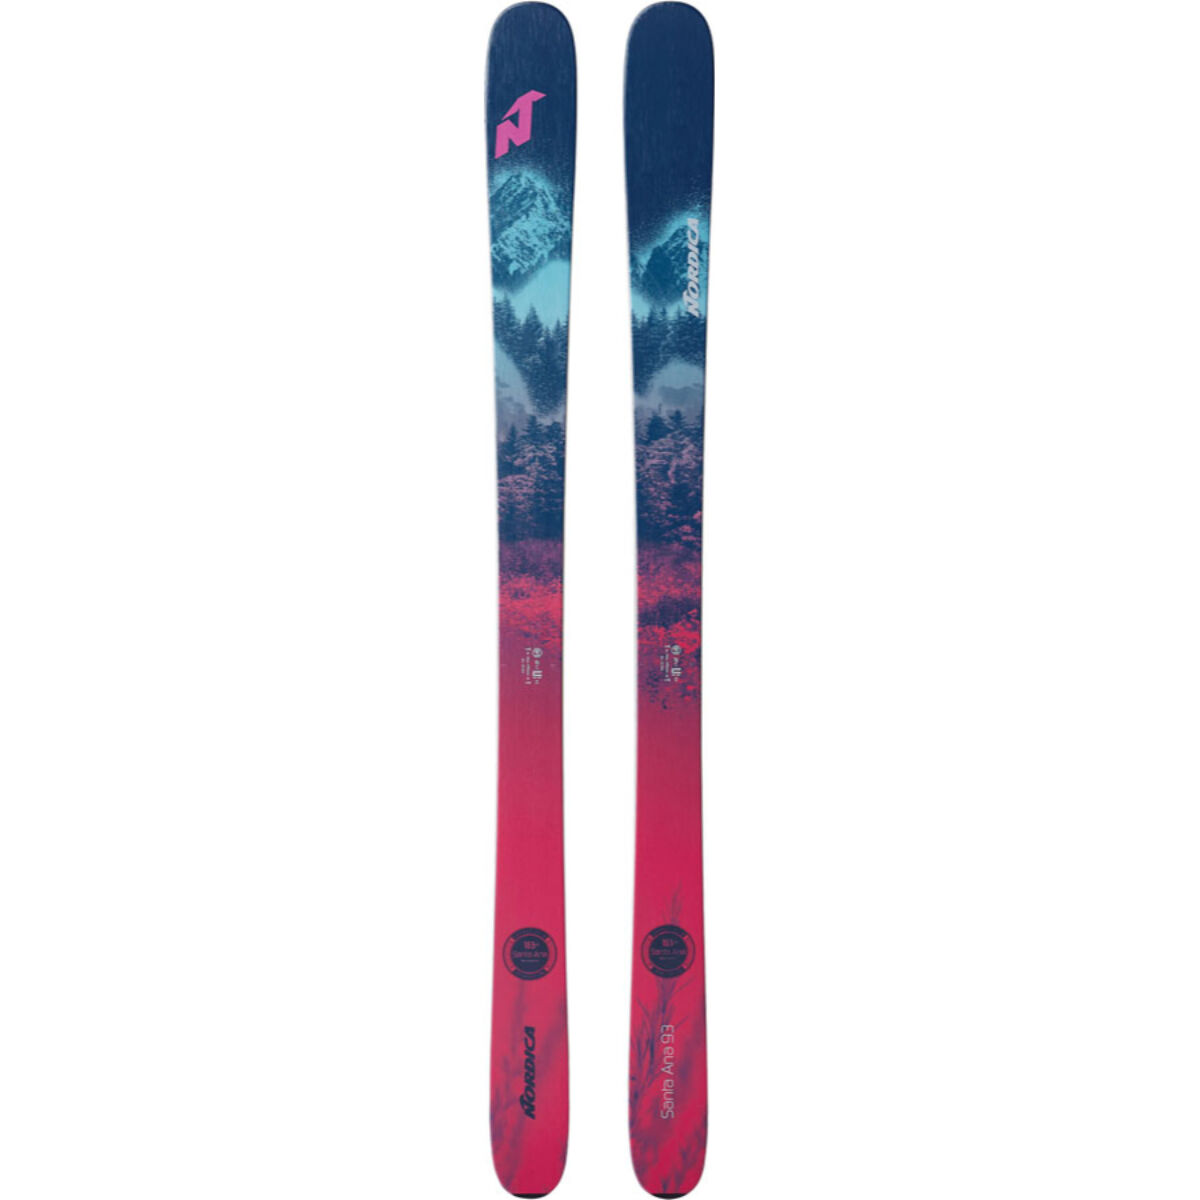 Nordica Skis and Ski Boots - Women's 